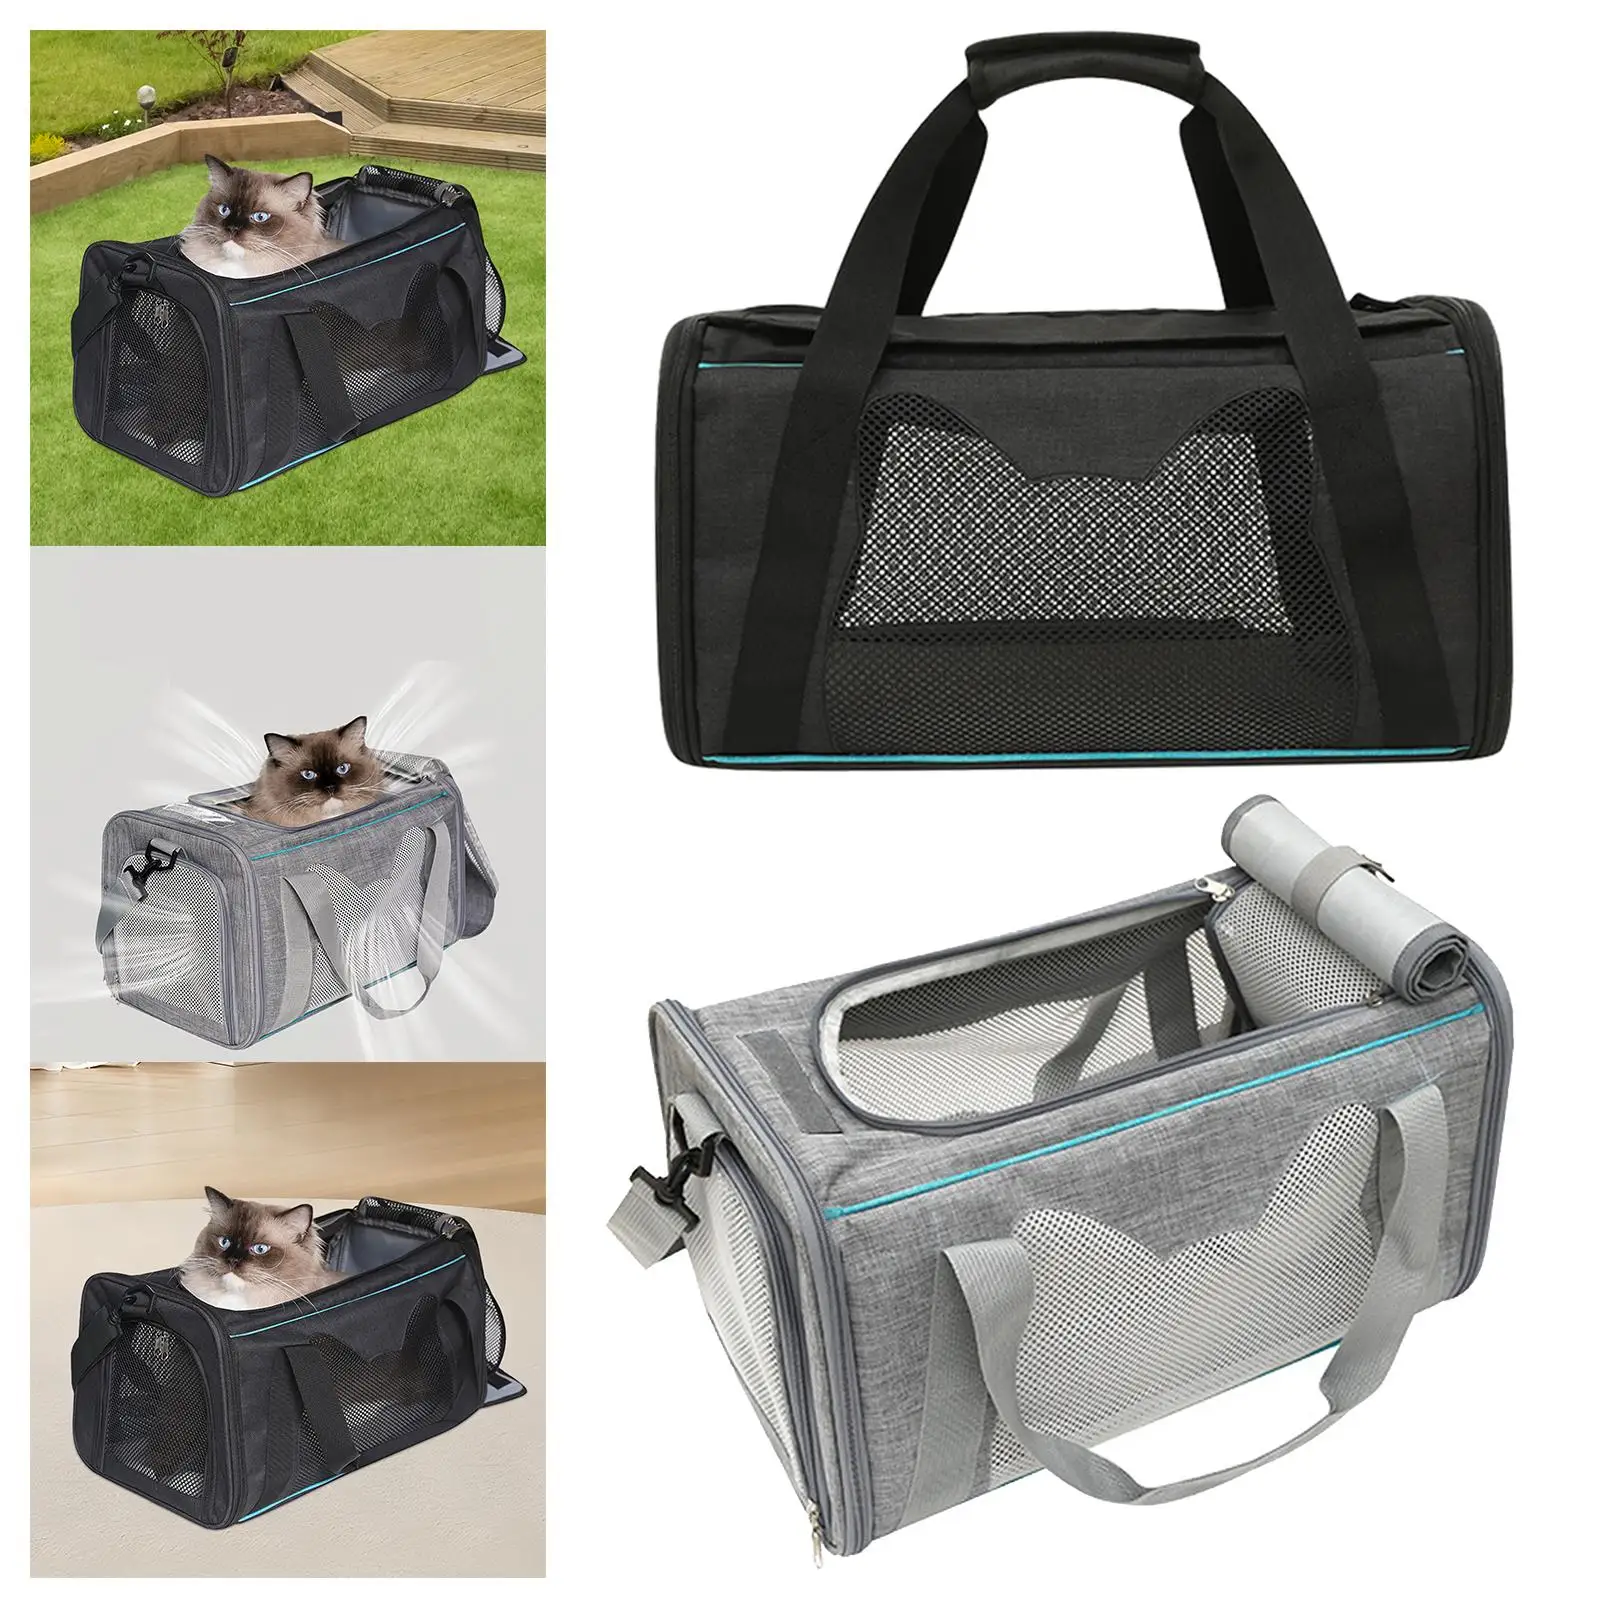 Portable Cat Carrier Folding Side and Top Opening Lightweight Shoulder Bag Travel Dogs Carrier for Puppy Bunny Rabbit Kitten